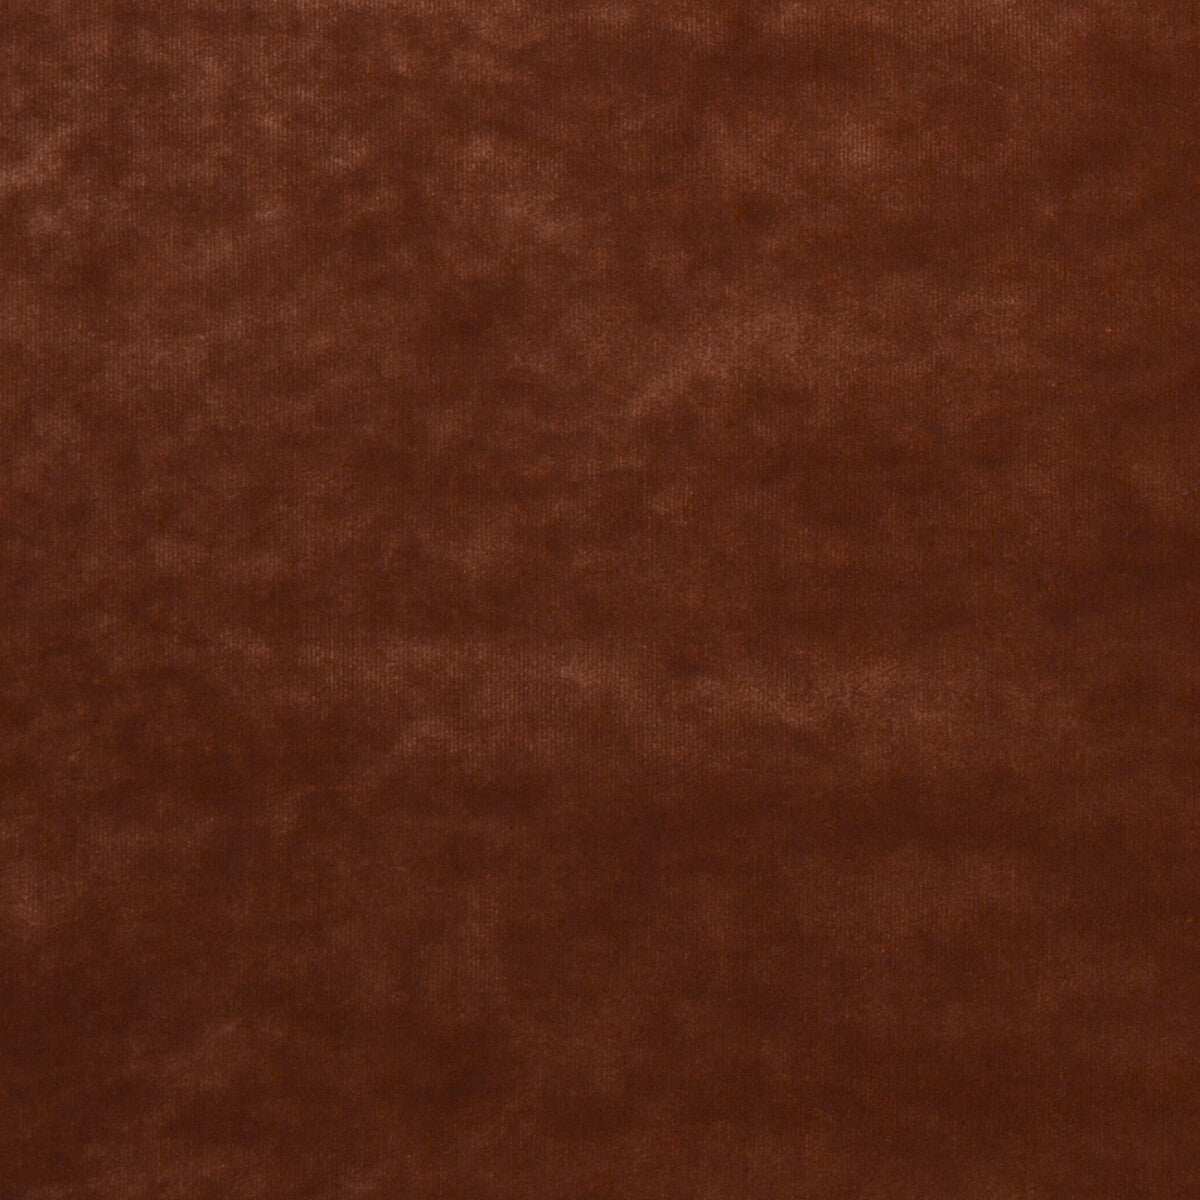 Mercury fabric in rust color - pattern ED85222.395.0 - by Threads in the Odyssey collection